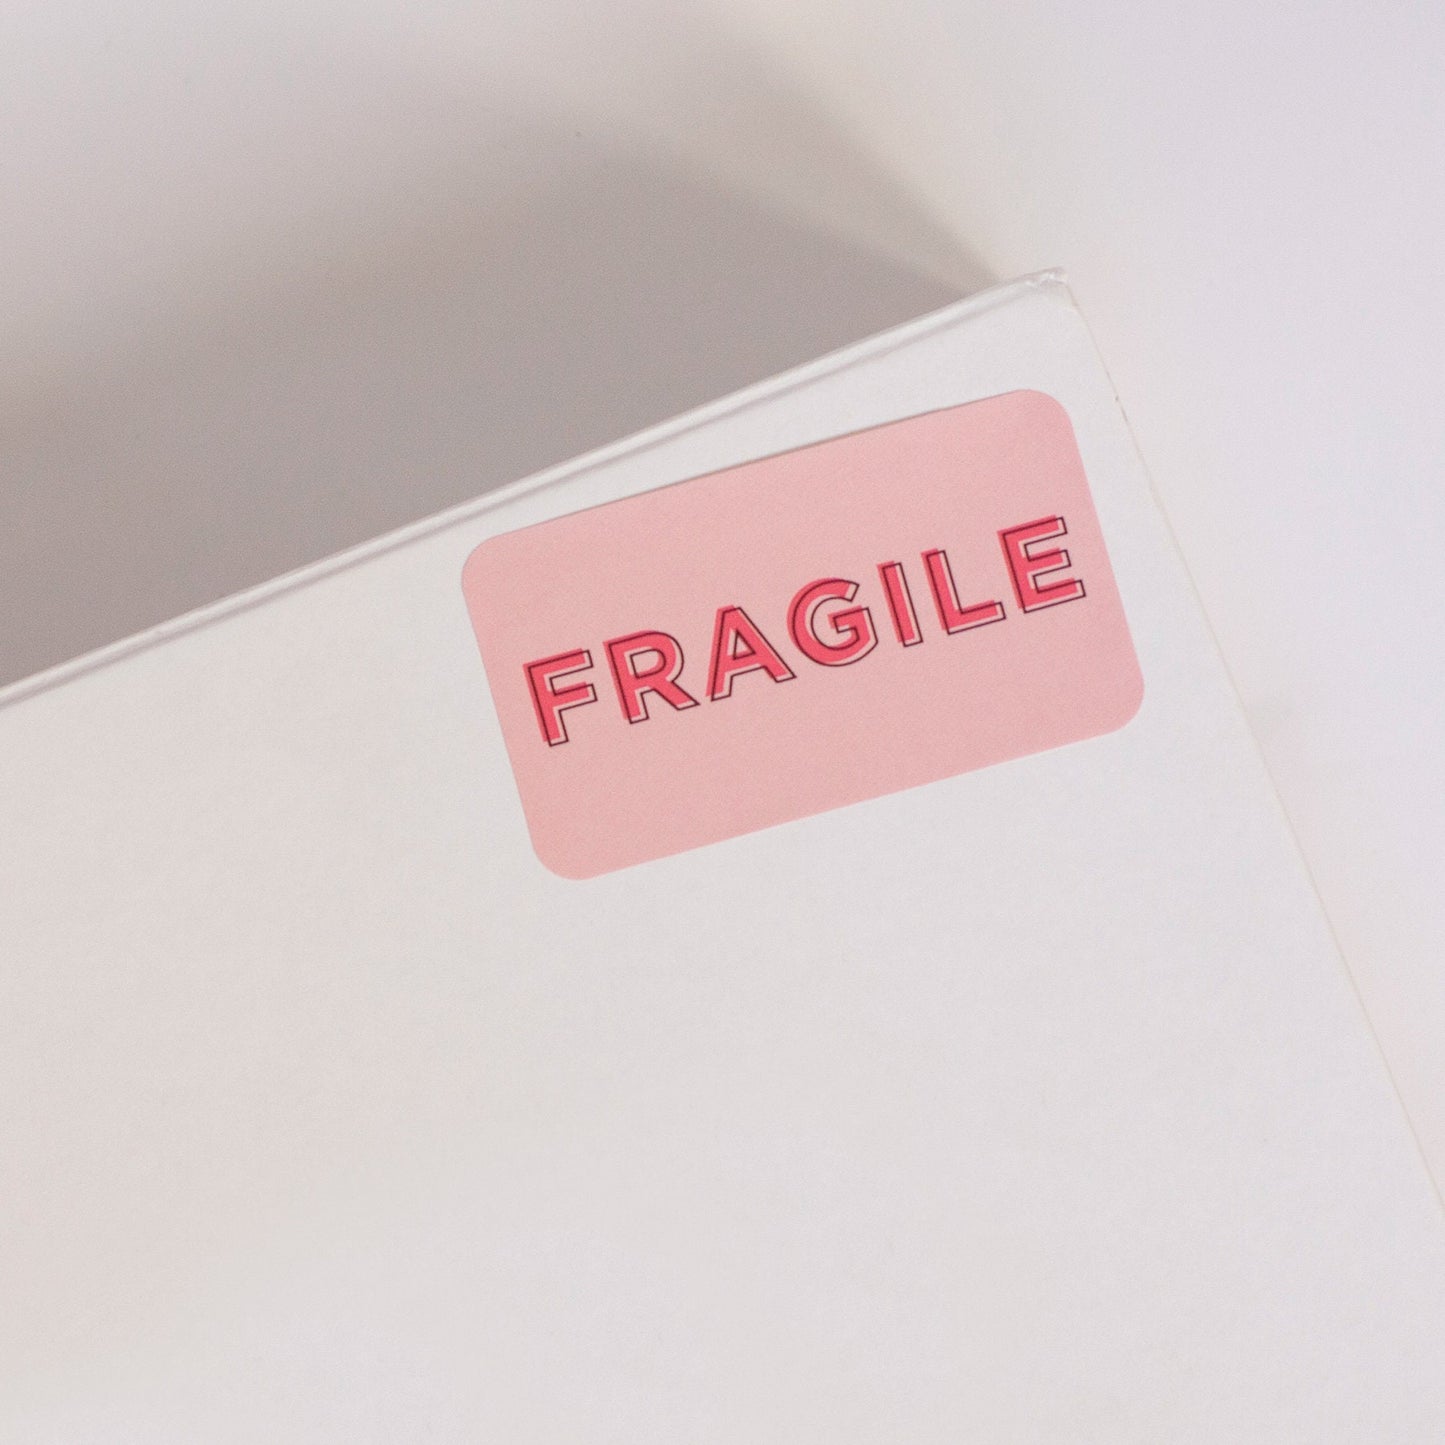 Stickers Pink fragile 87mm x 43mm